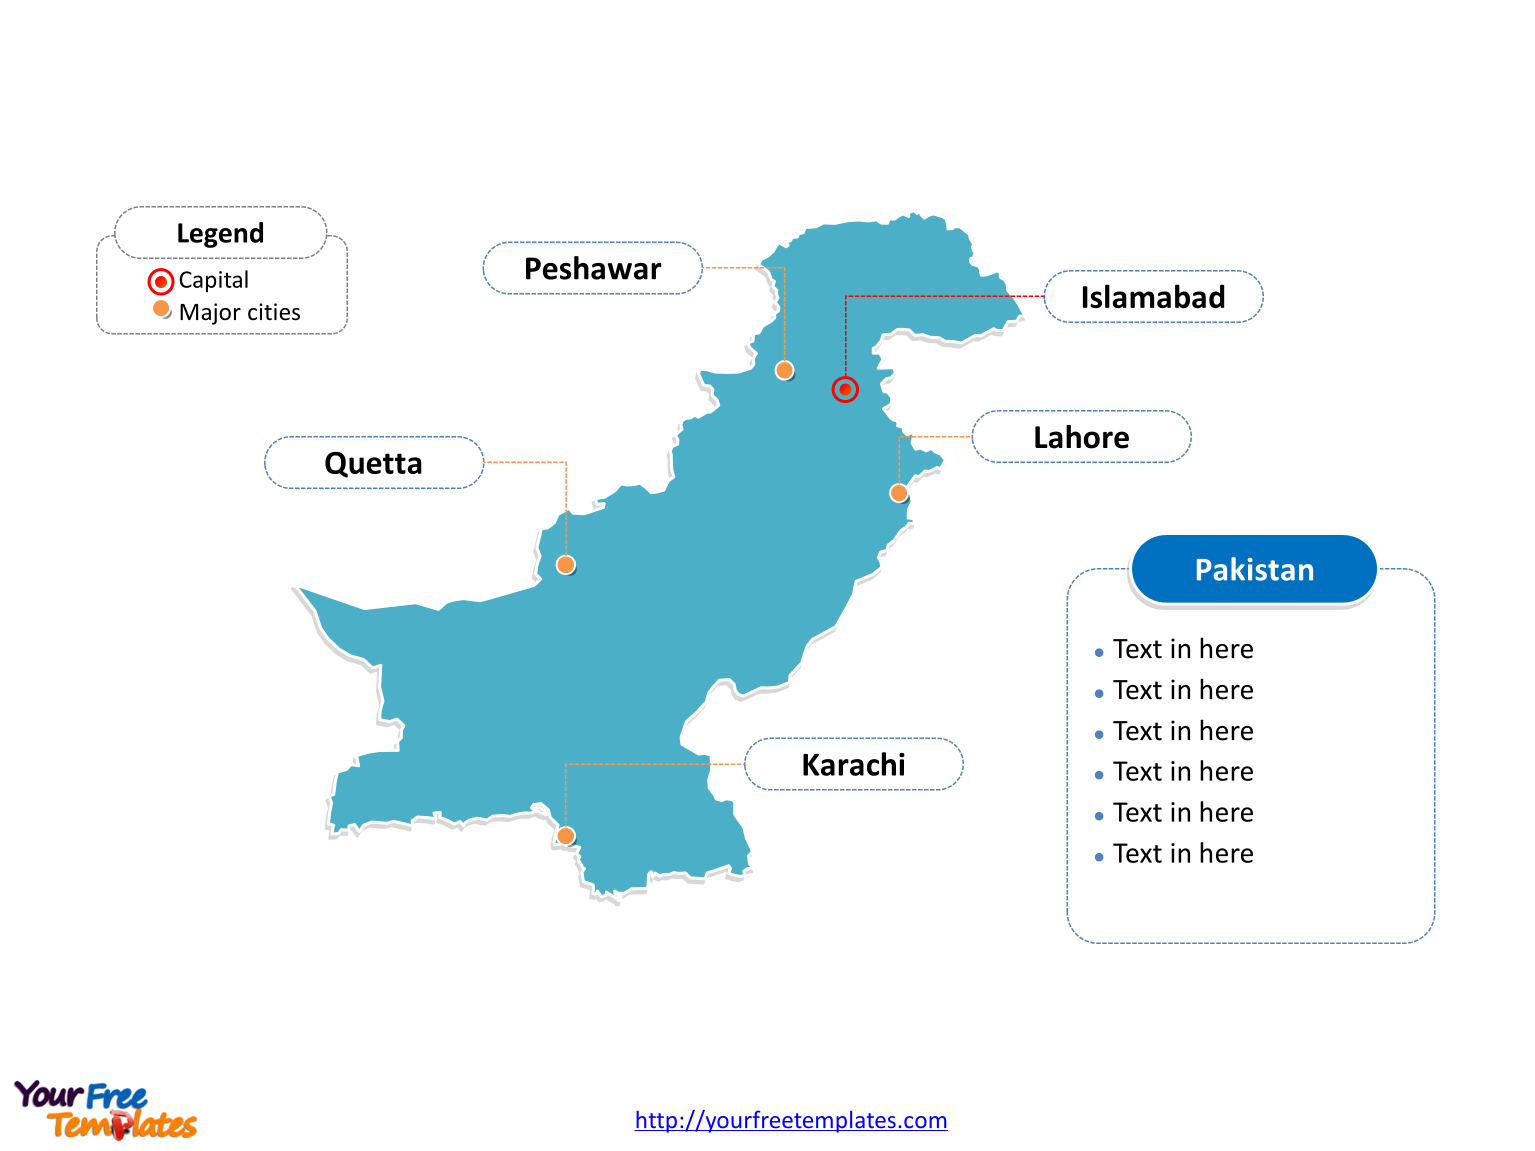 Pakistan Outline map labeled with cities